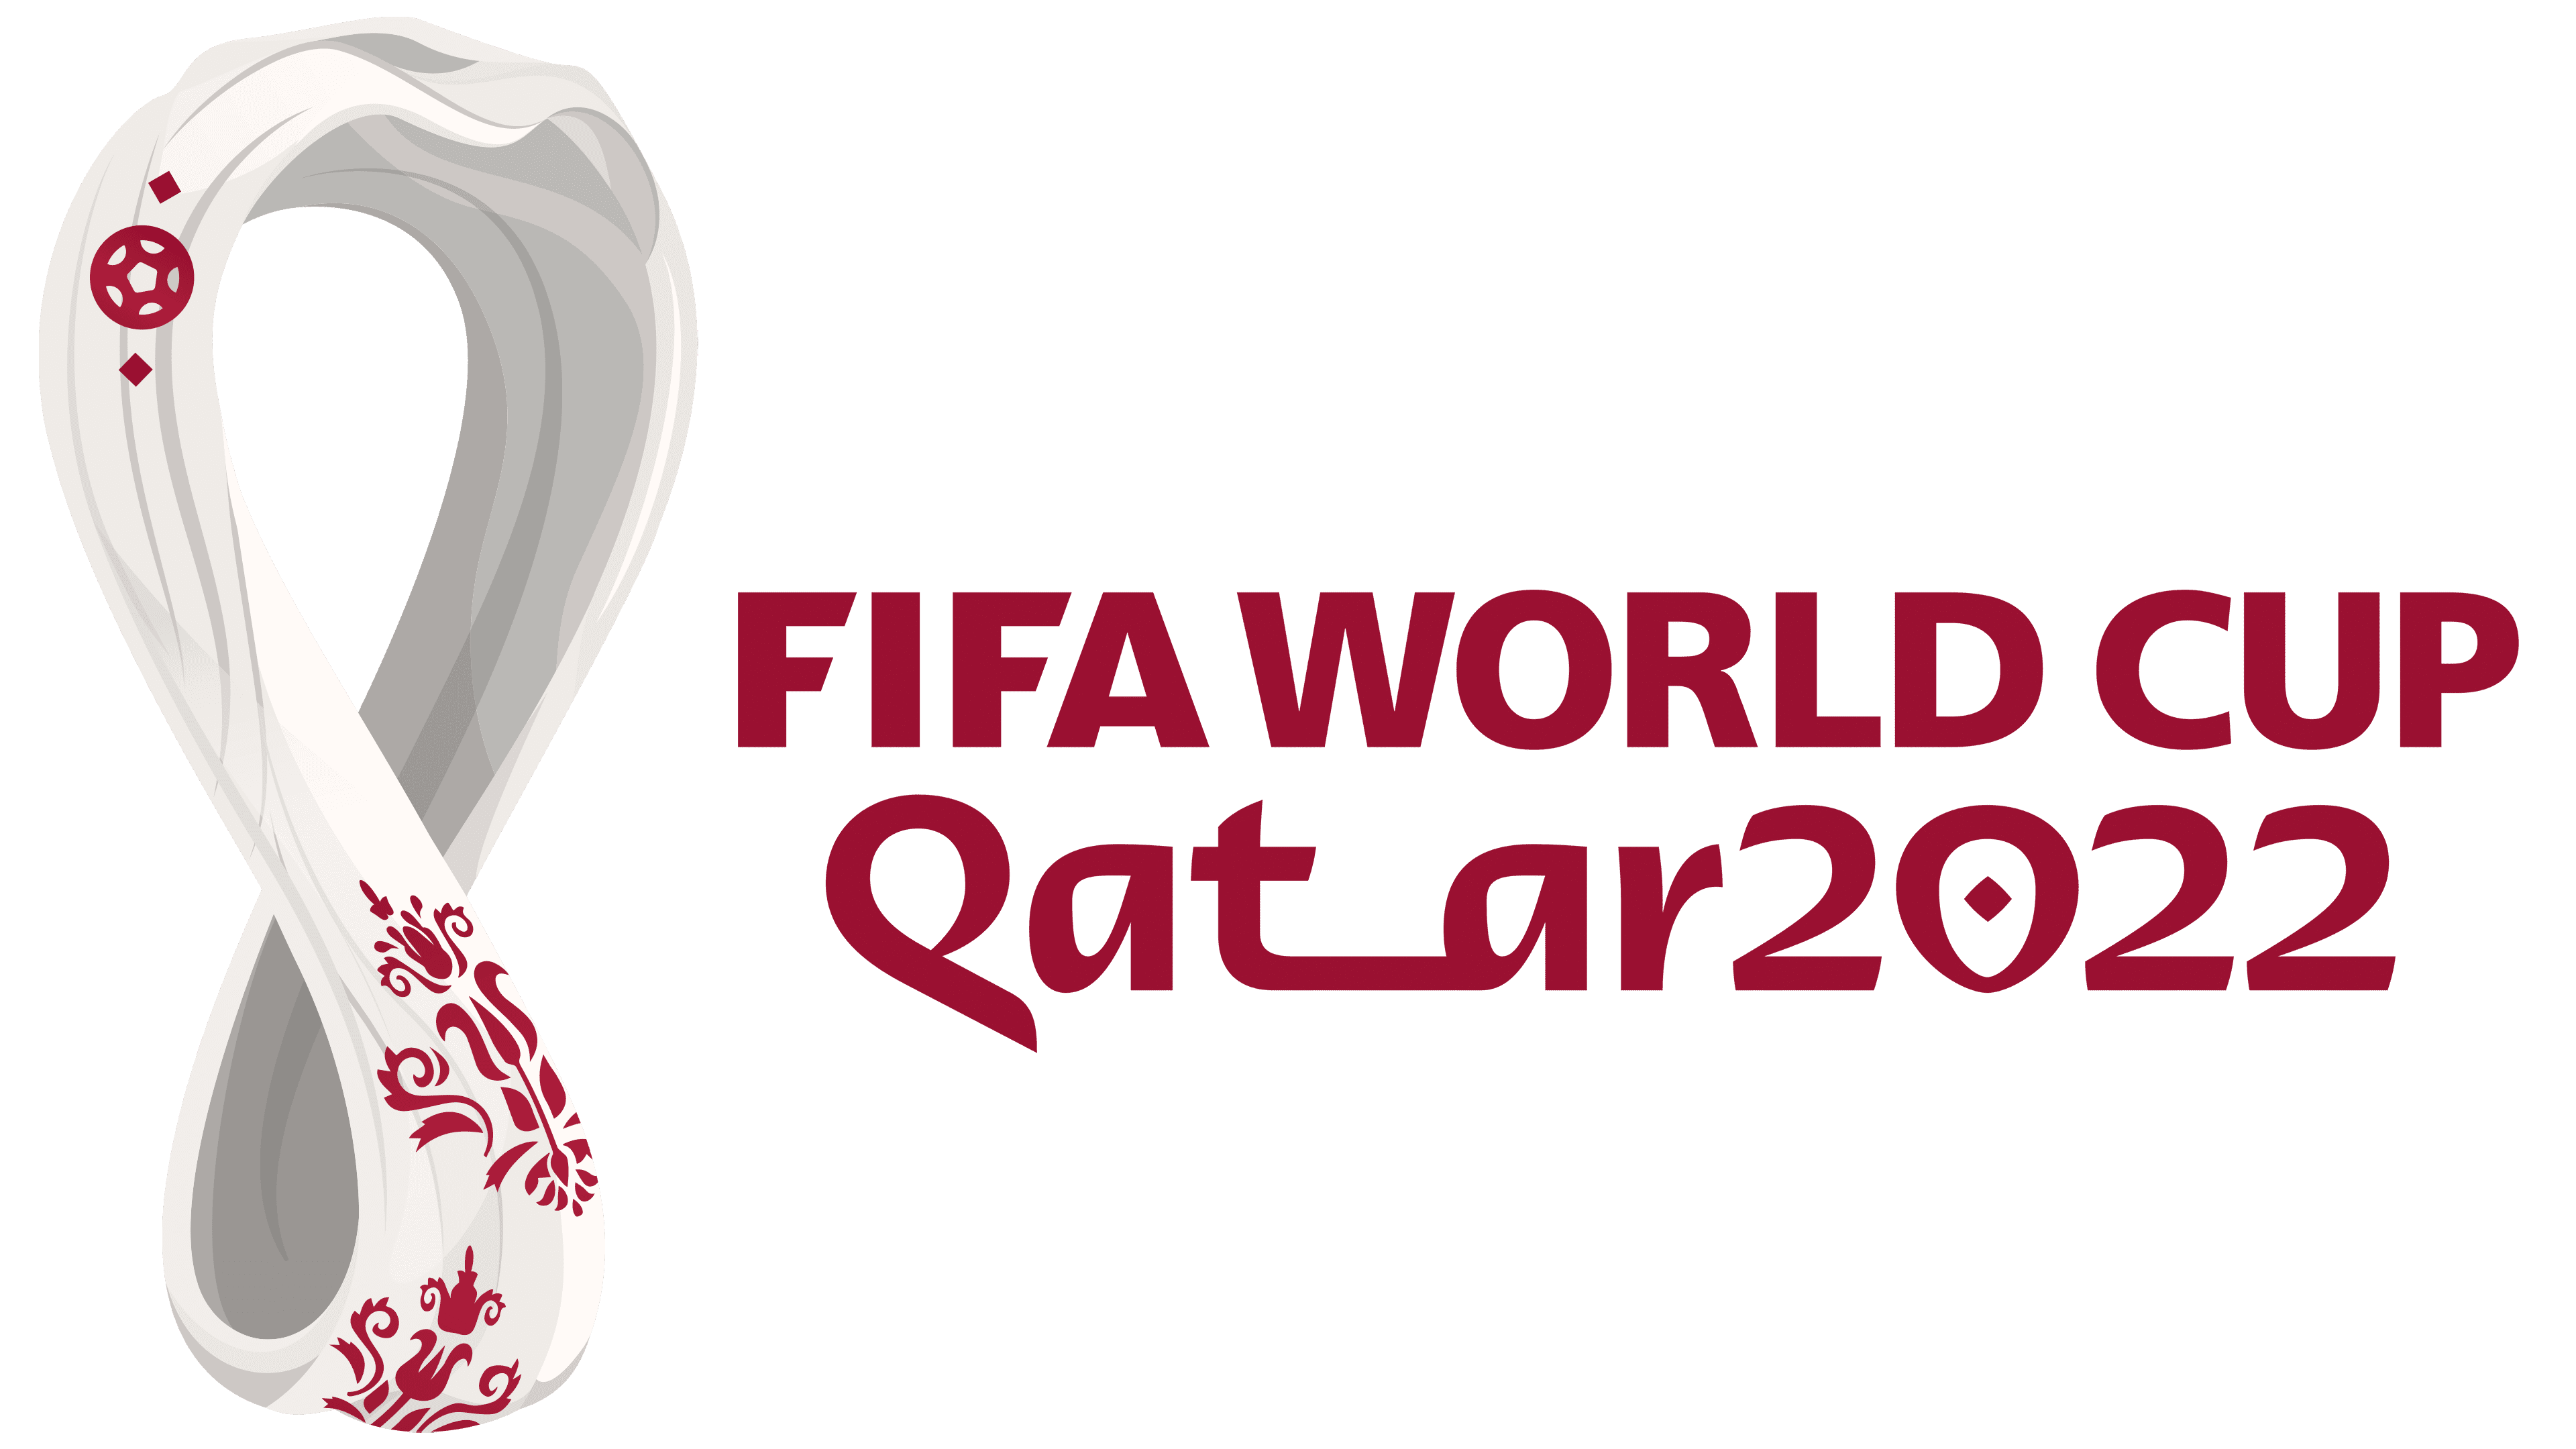 Fifa World Cup PNG HD22 Logo PNG File